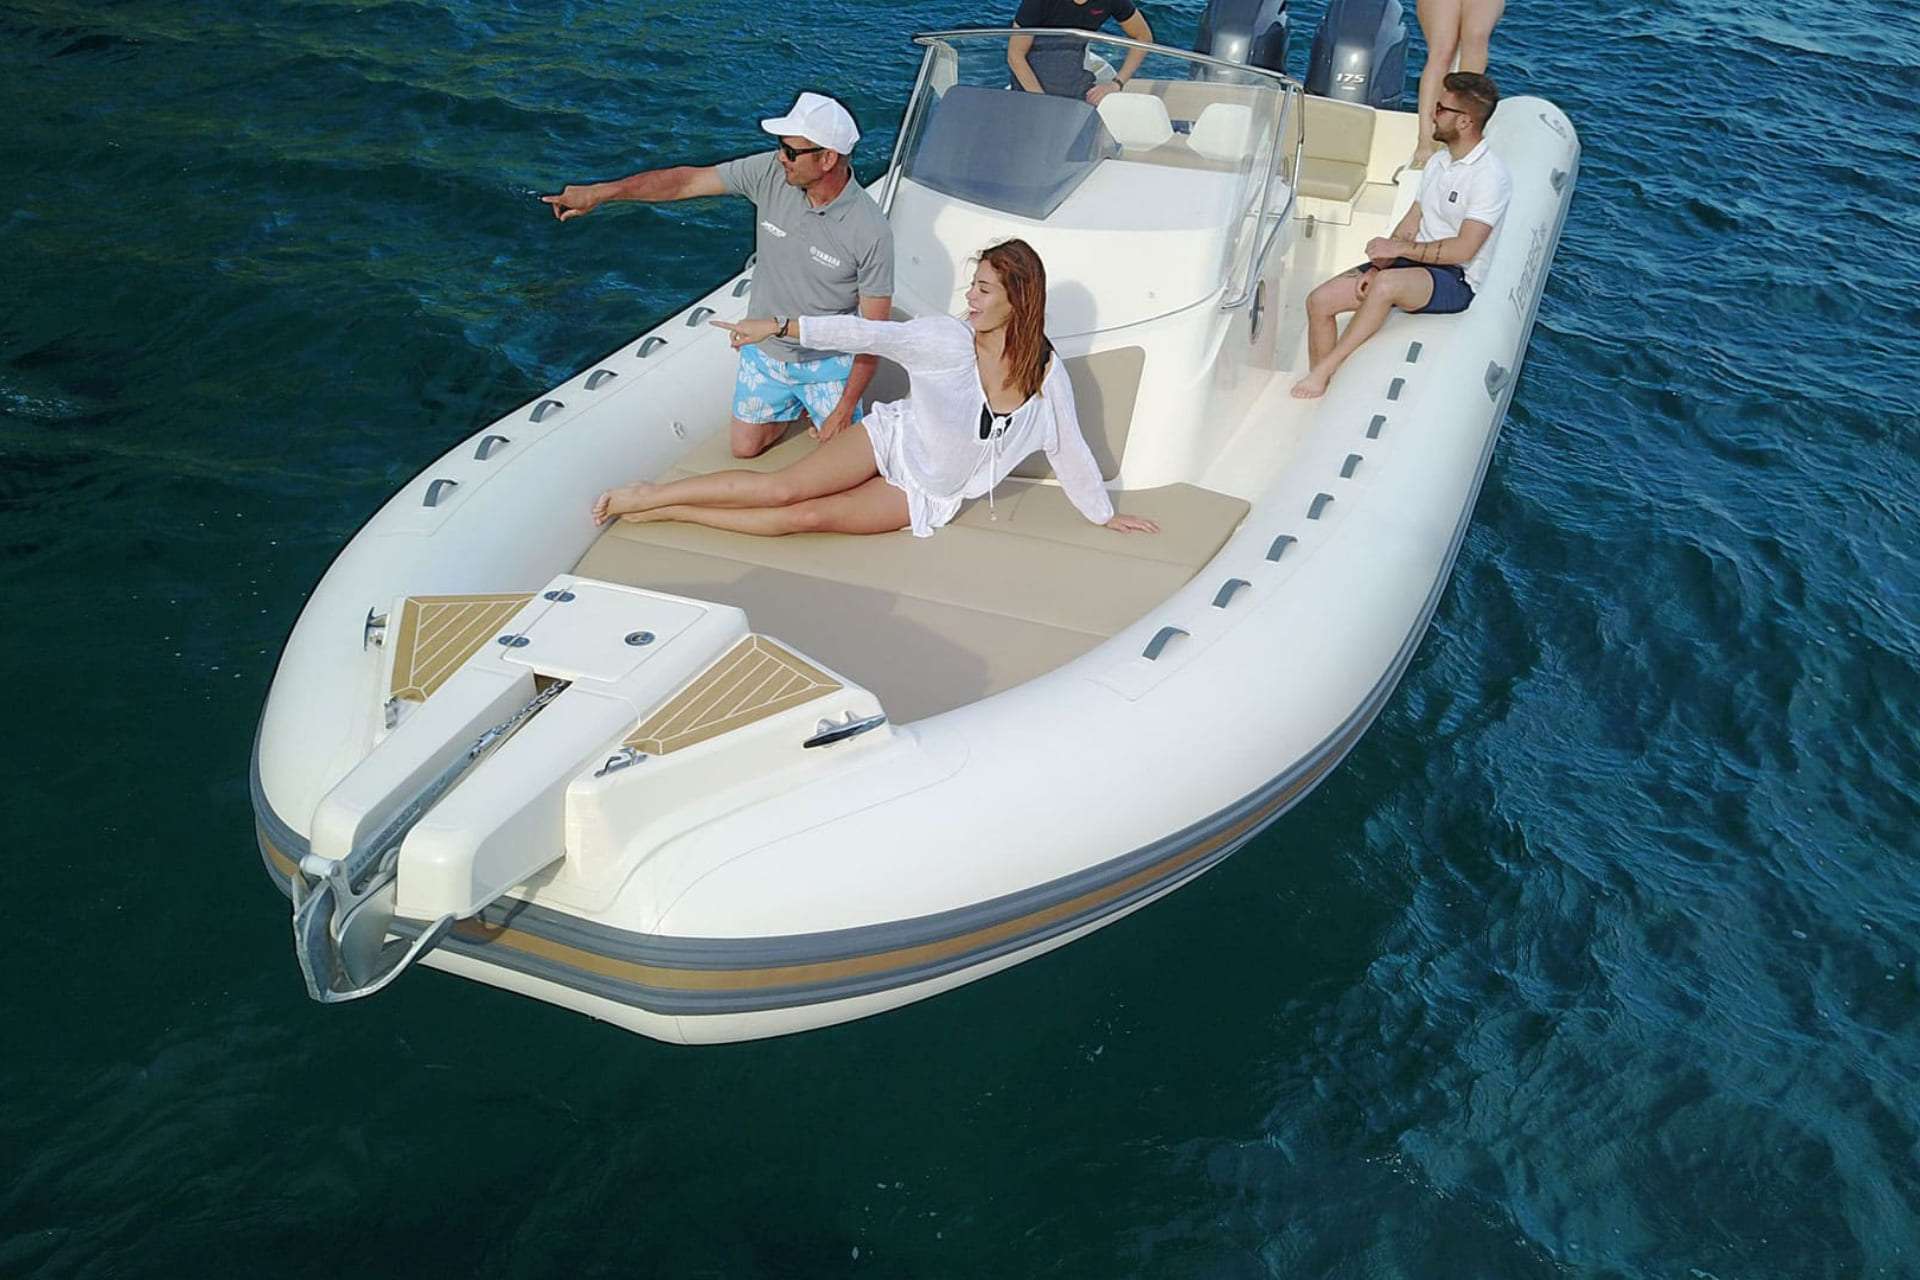 Tempest 850 WA - Yacht Charter Cogolin & Boat hire in France French Riviera St. Tropez Saint Tropez 4